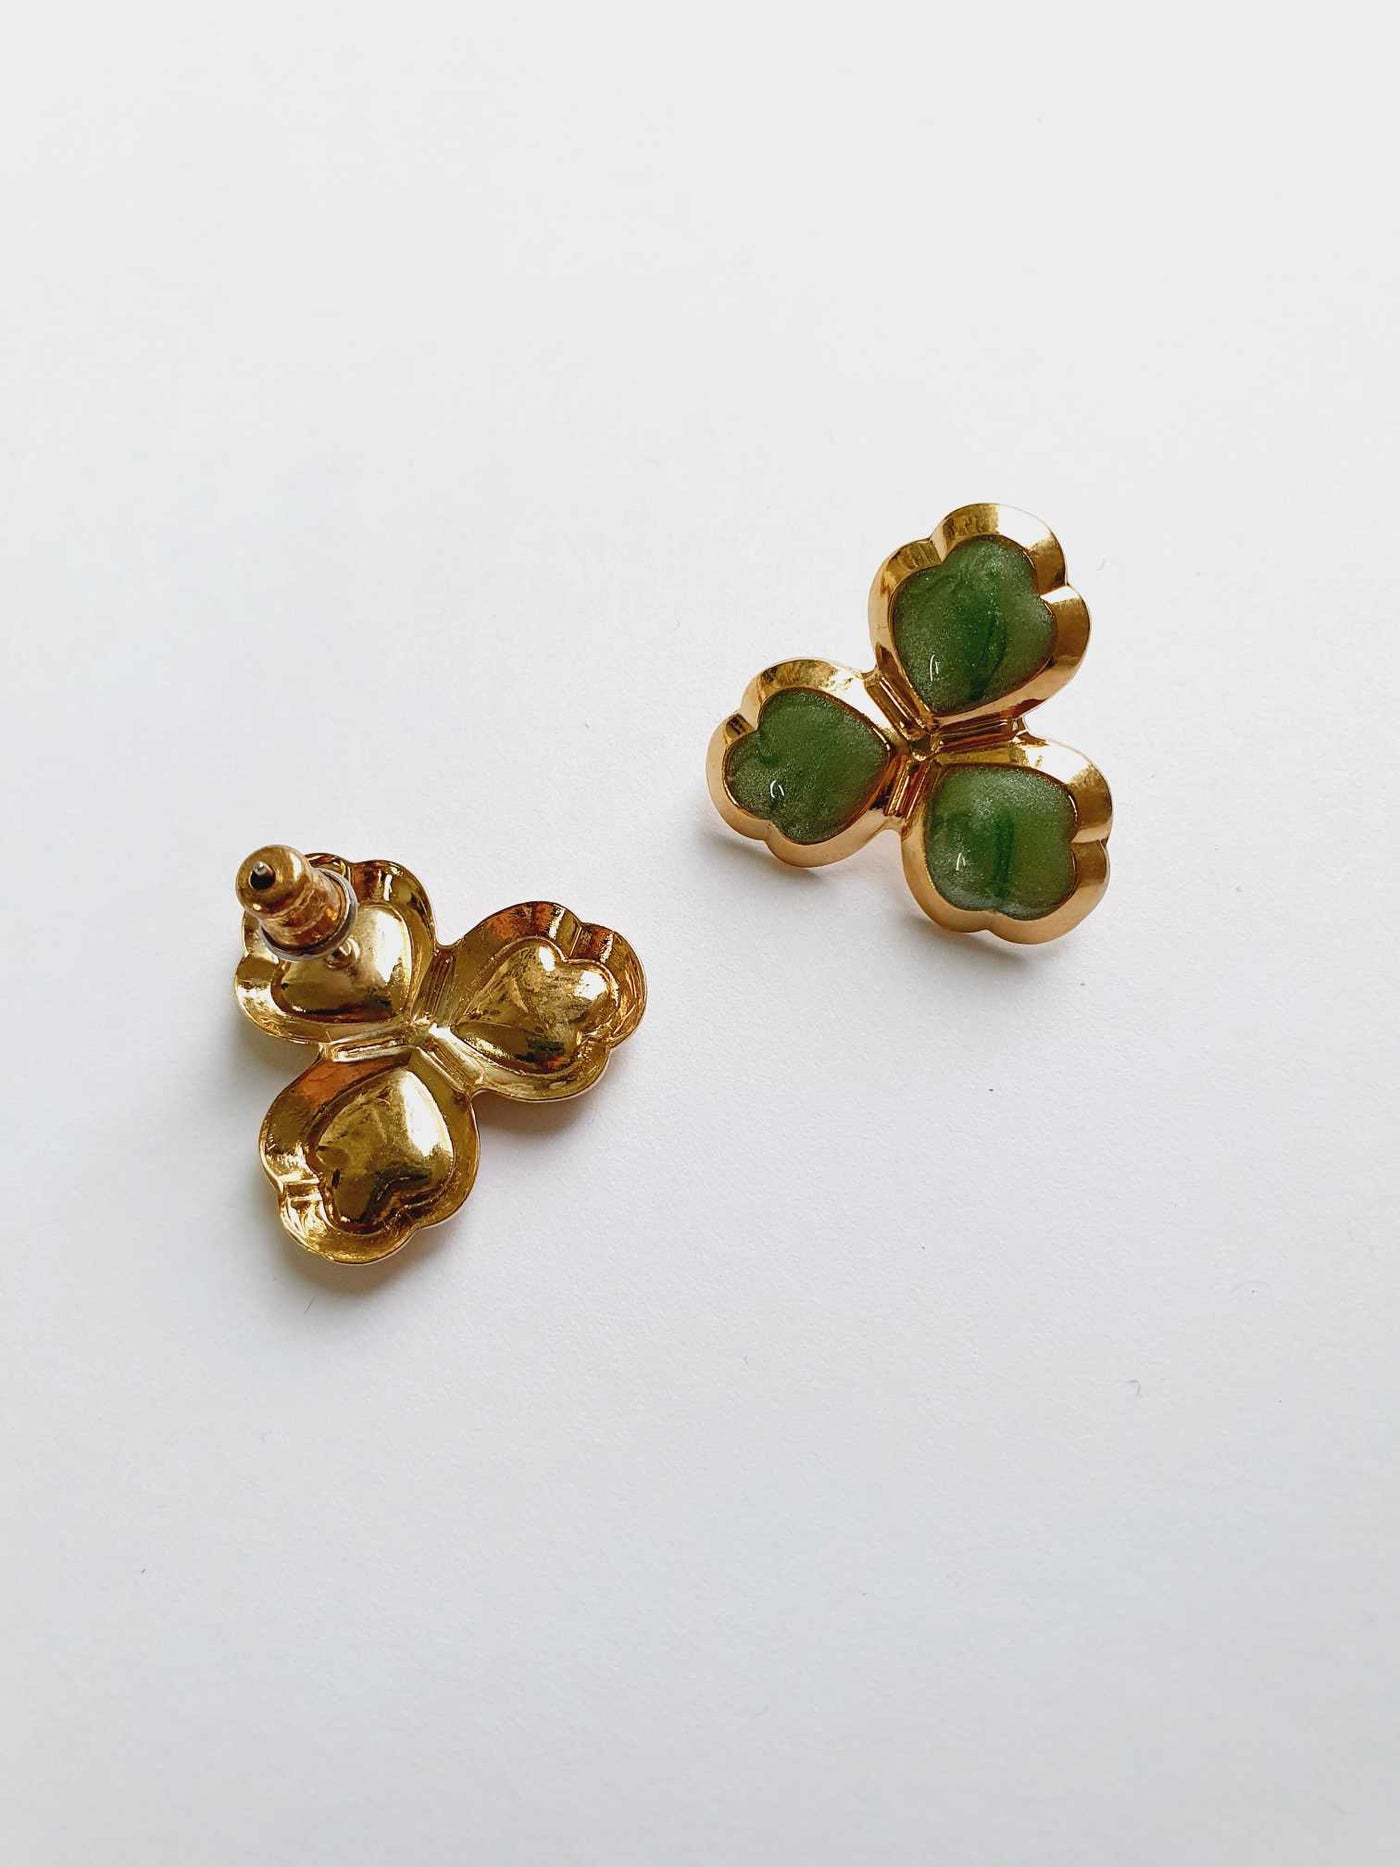 Vintage Gold Plated Clover Stud Earrings